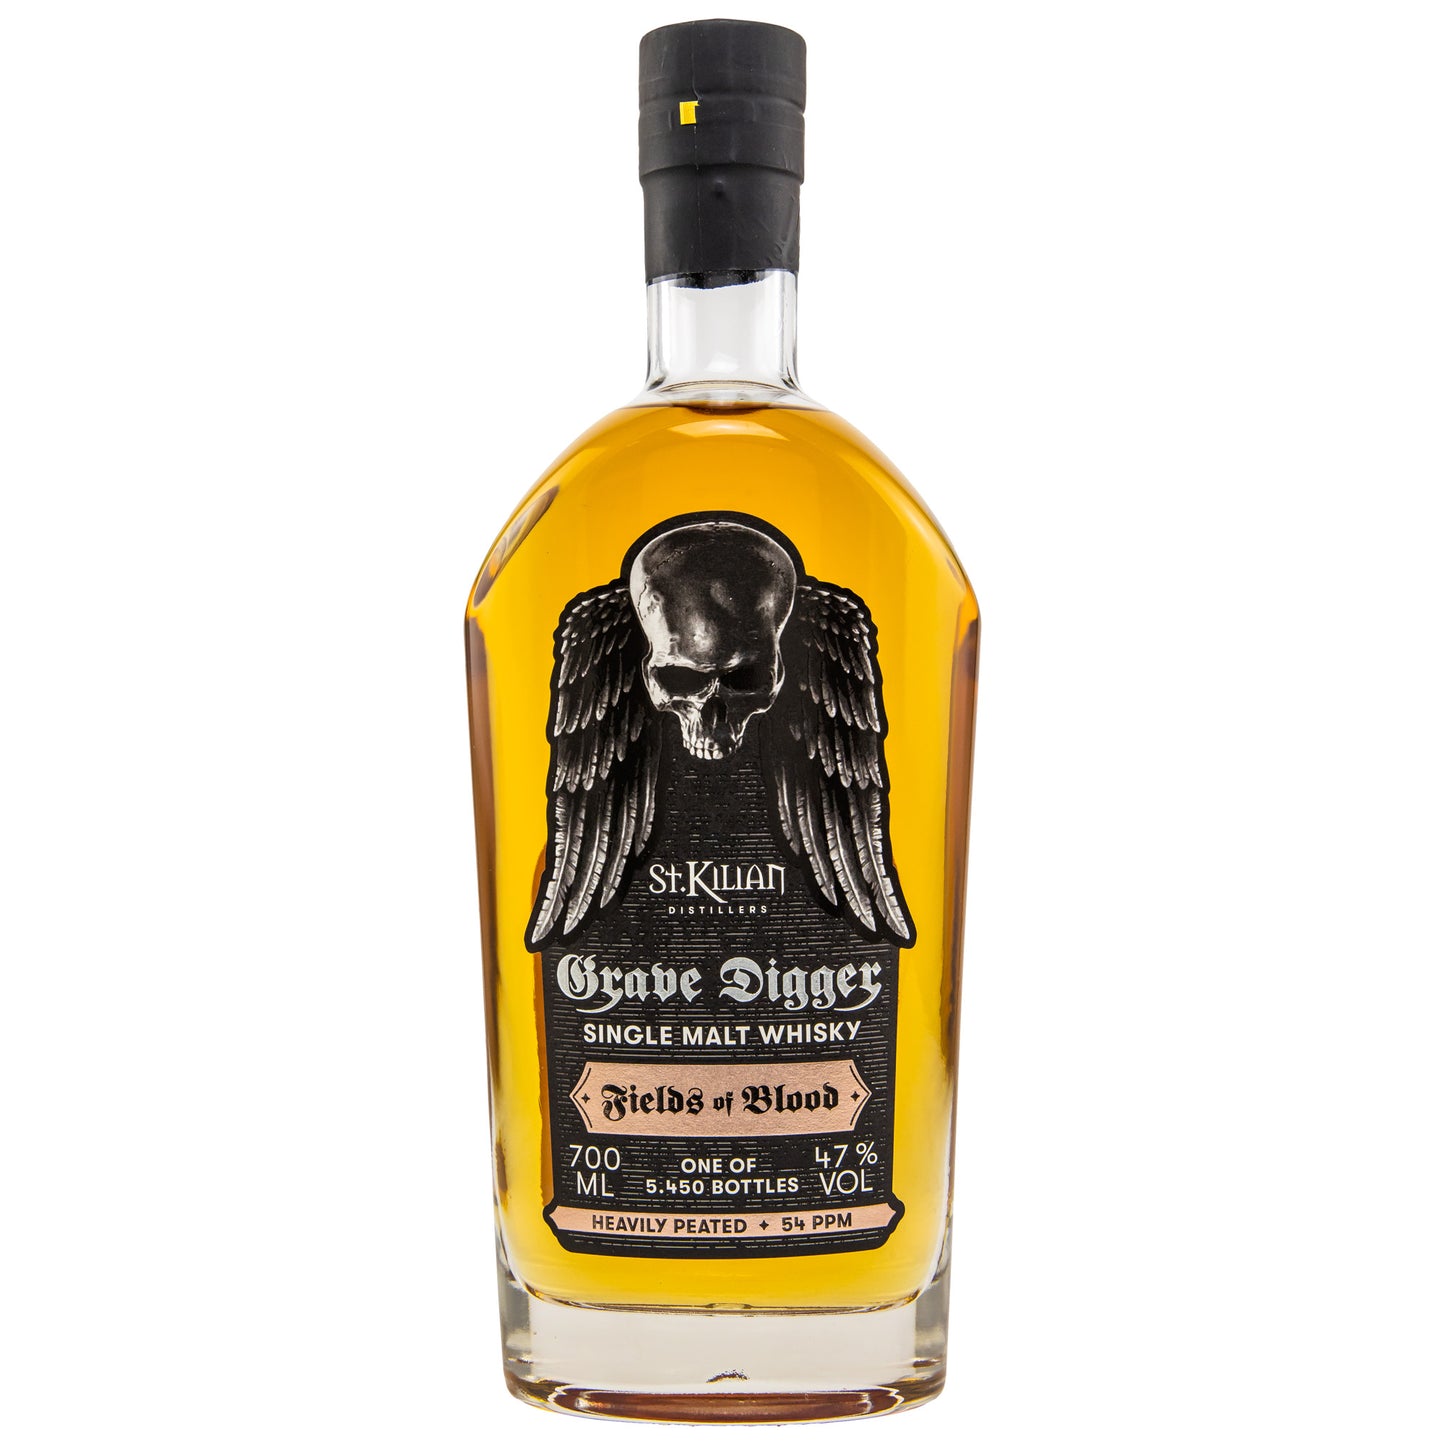 ST. KILIAN - Grave Digger Field of Blood Peated Whisky - 47% Vol. - Schwarzbach Spirits